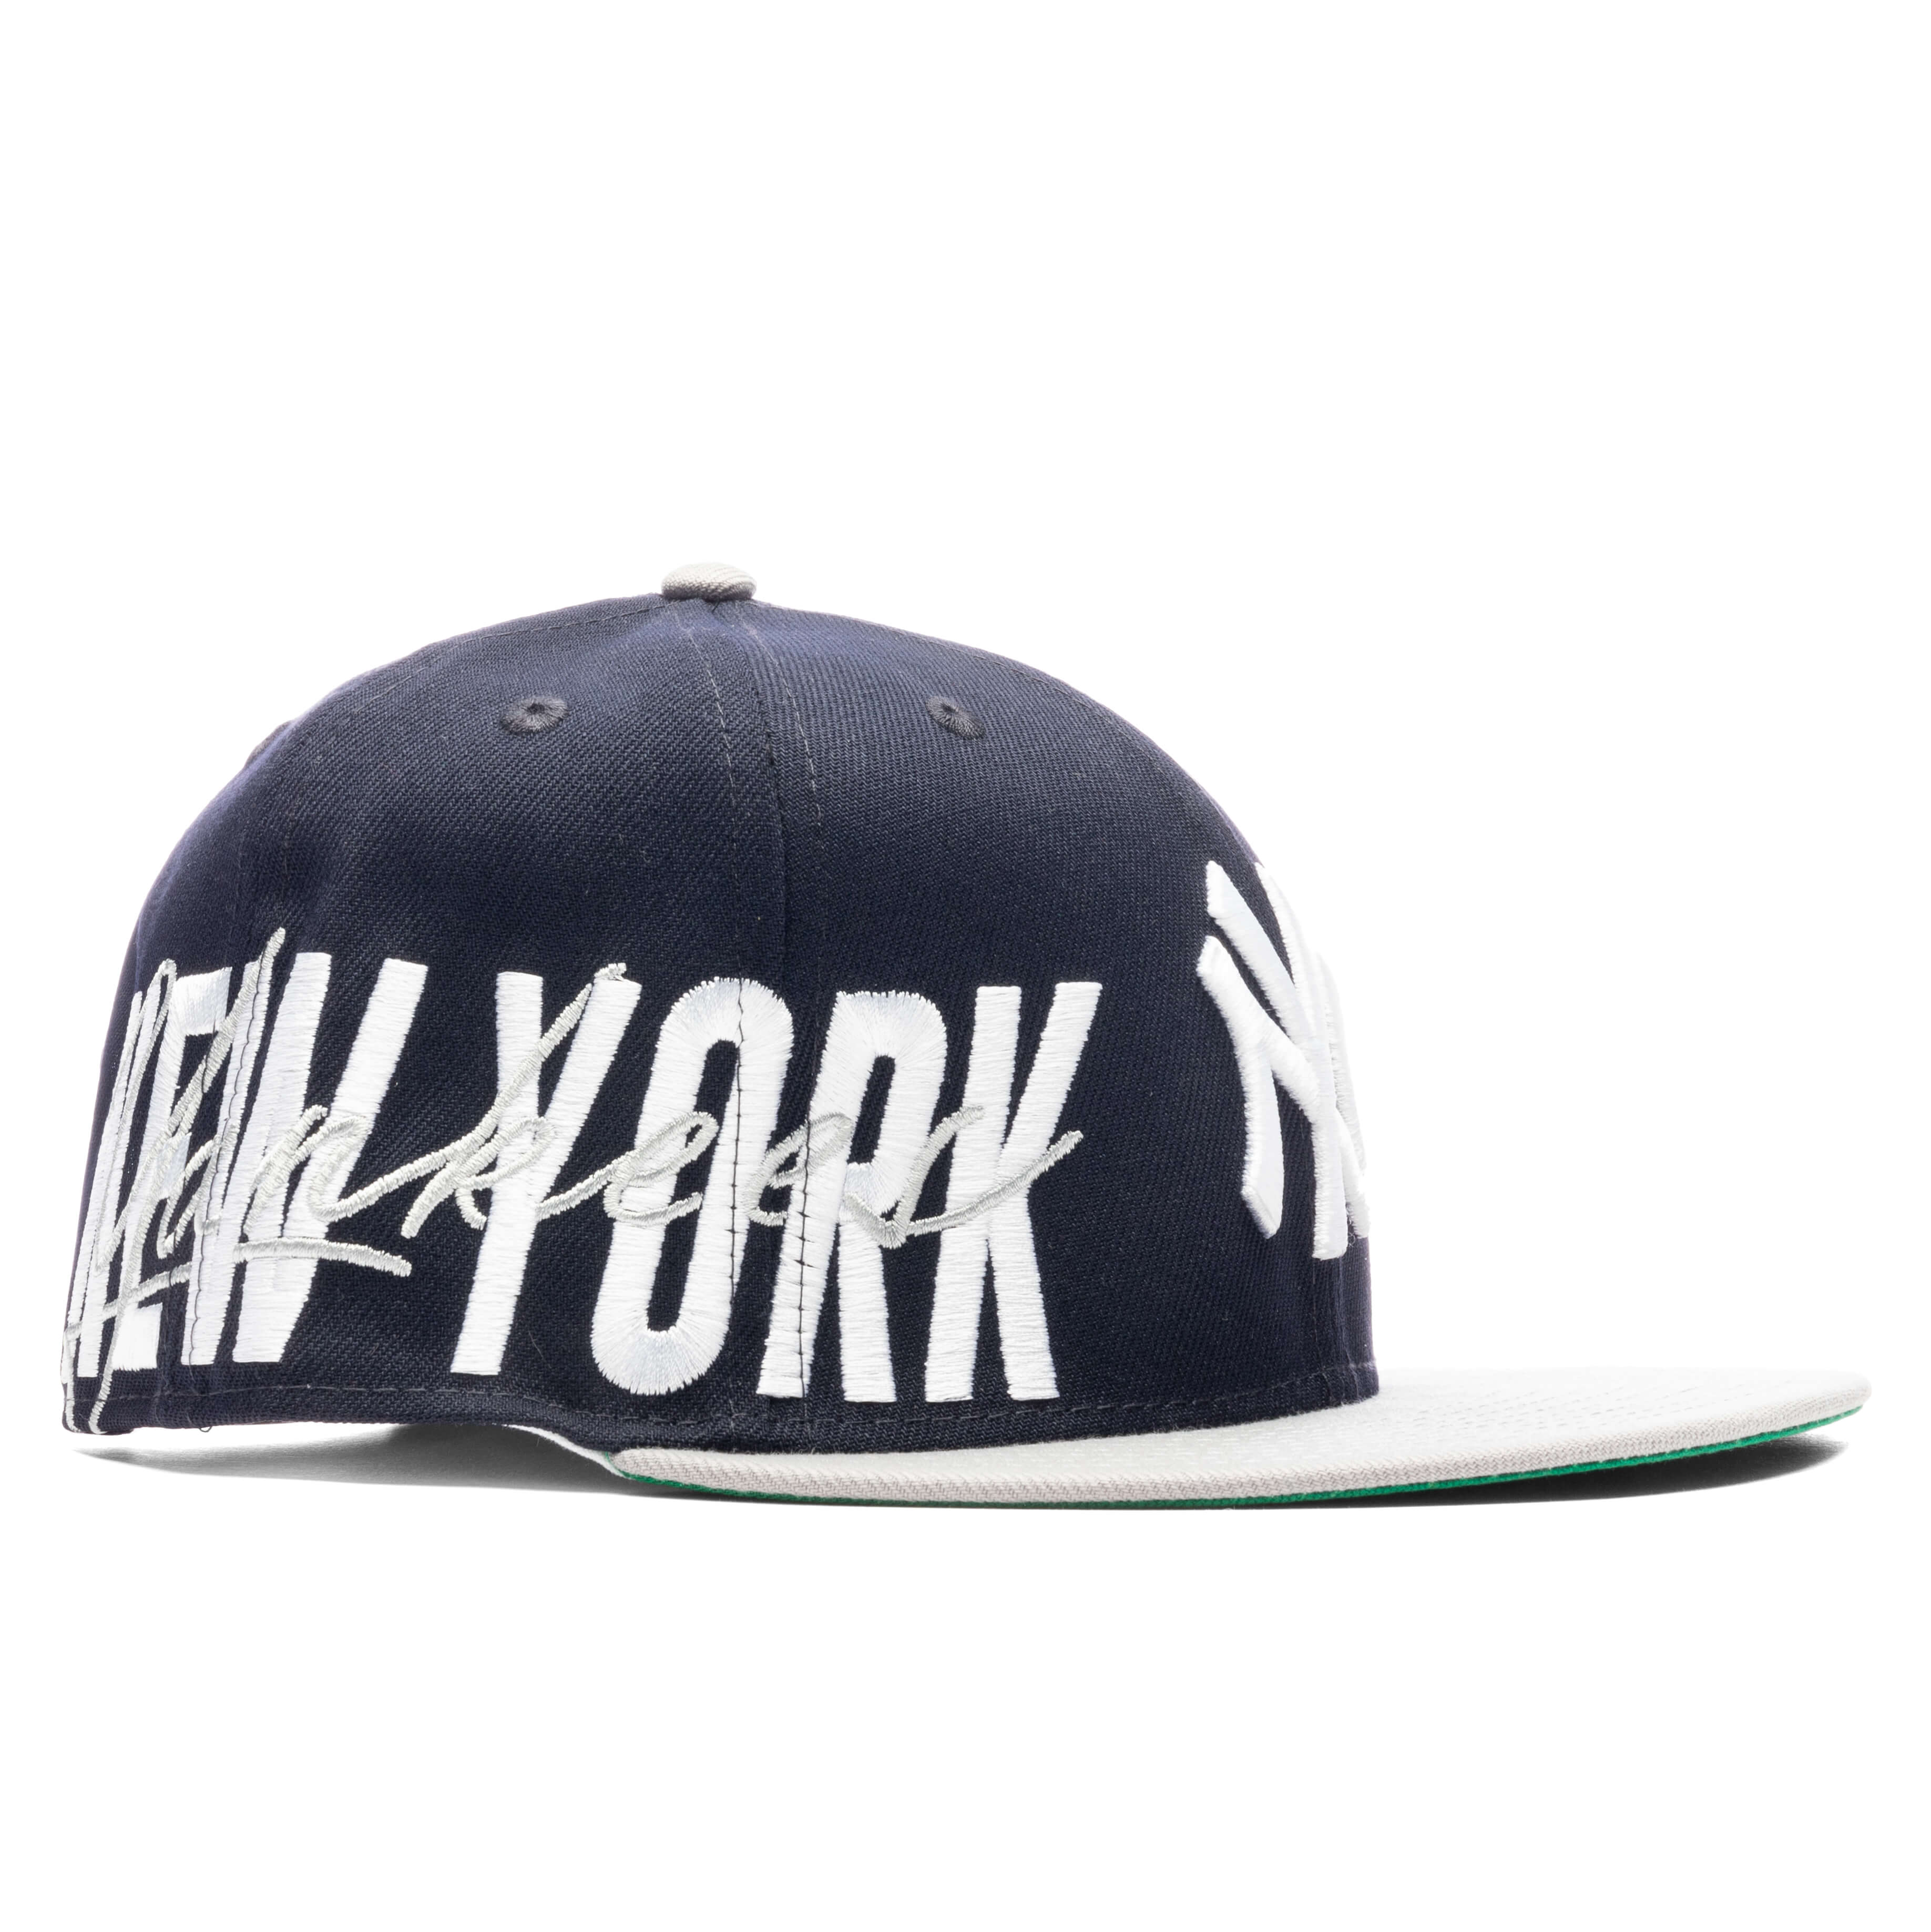 Sidefont 950 Adjustable - New York Yankees – Feature